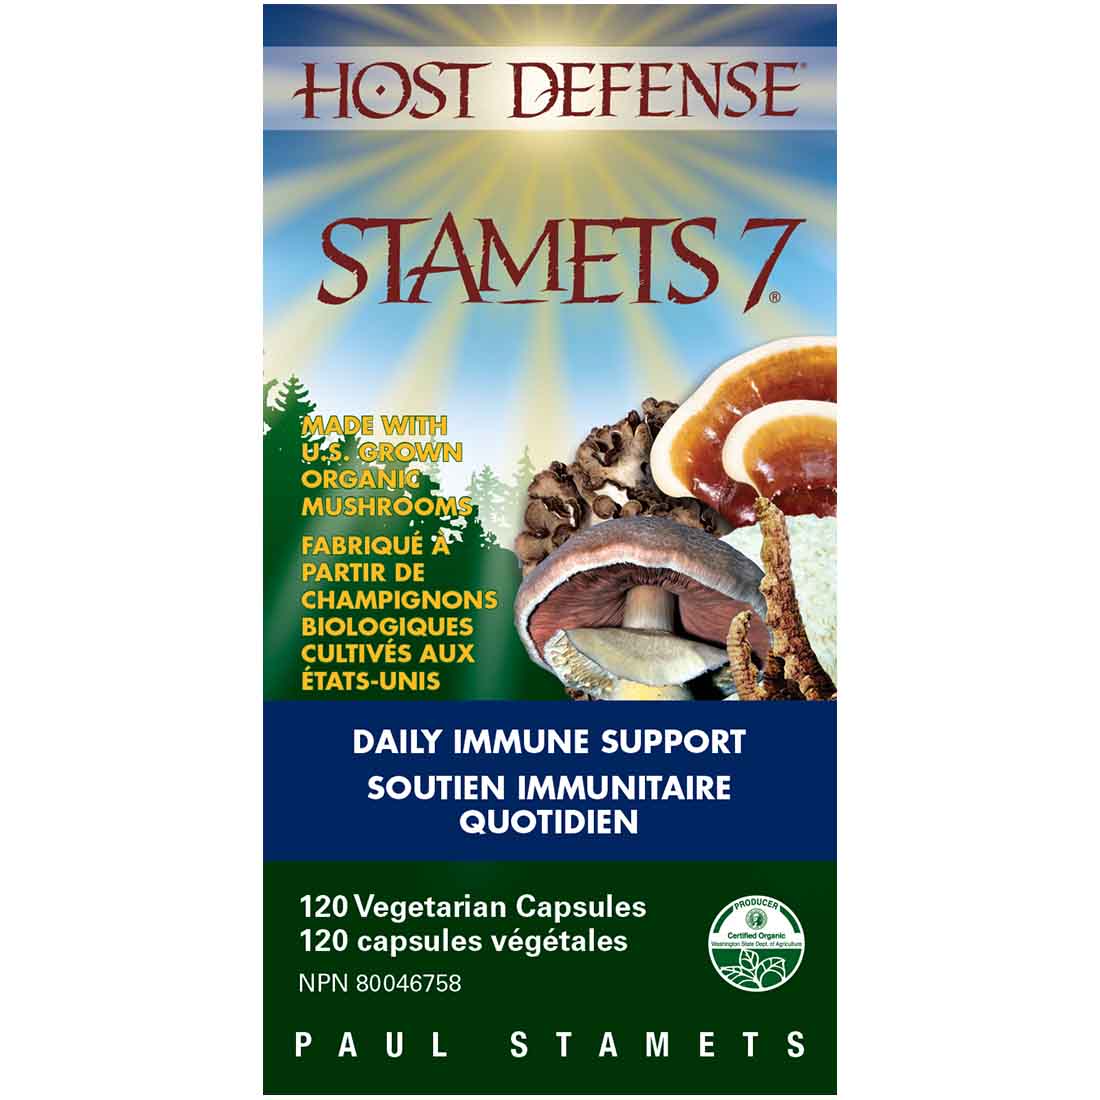 Host Defense Stamets 7, Daily Immune Support